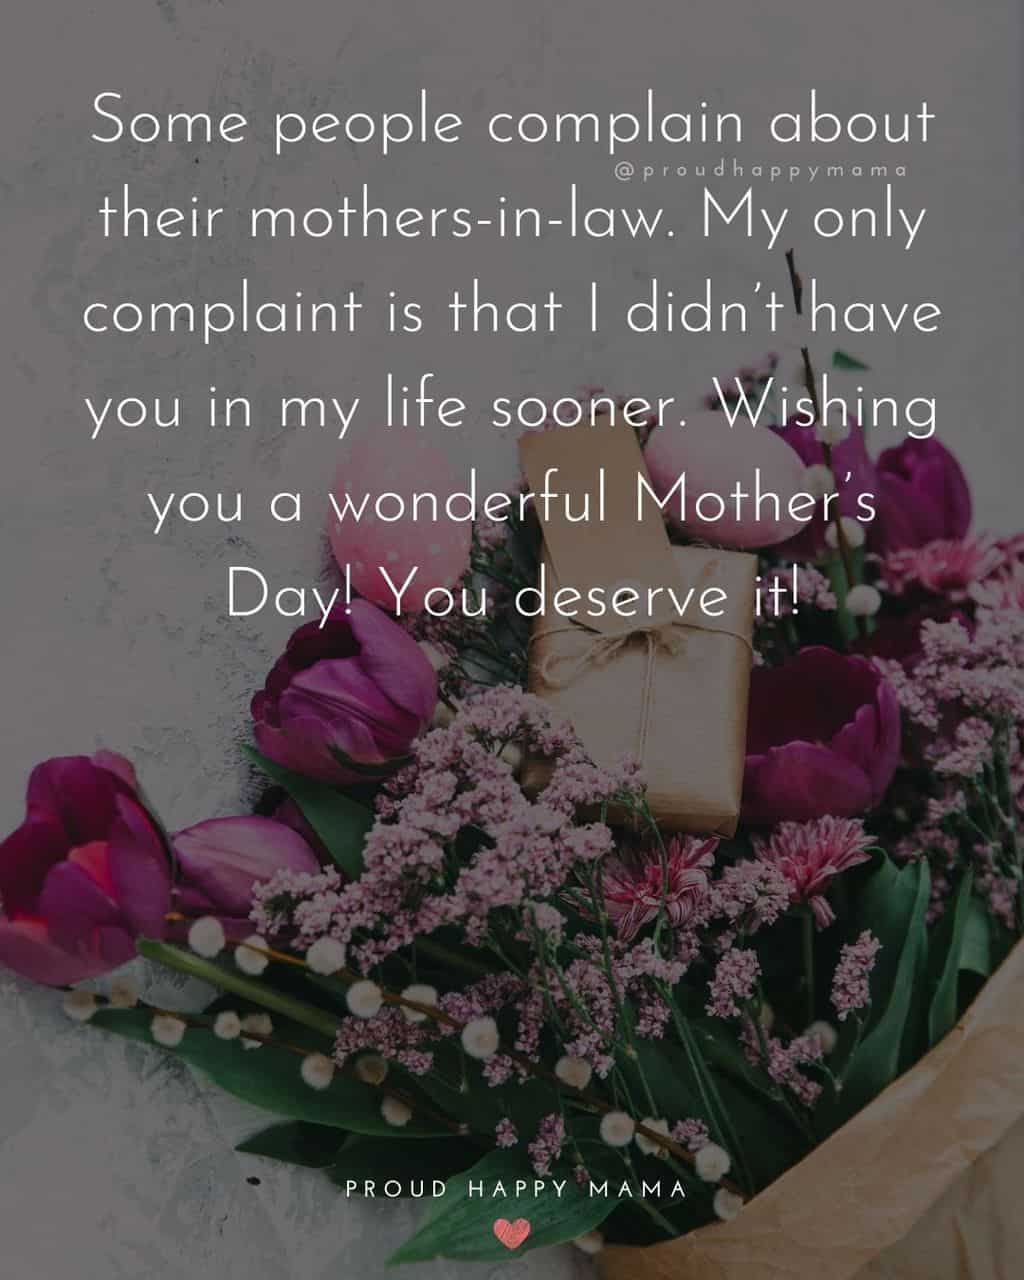 Happy Mothers Day Quotes For Mother In Law - Some people complain about their mothers-in-law. My only complaint is that I